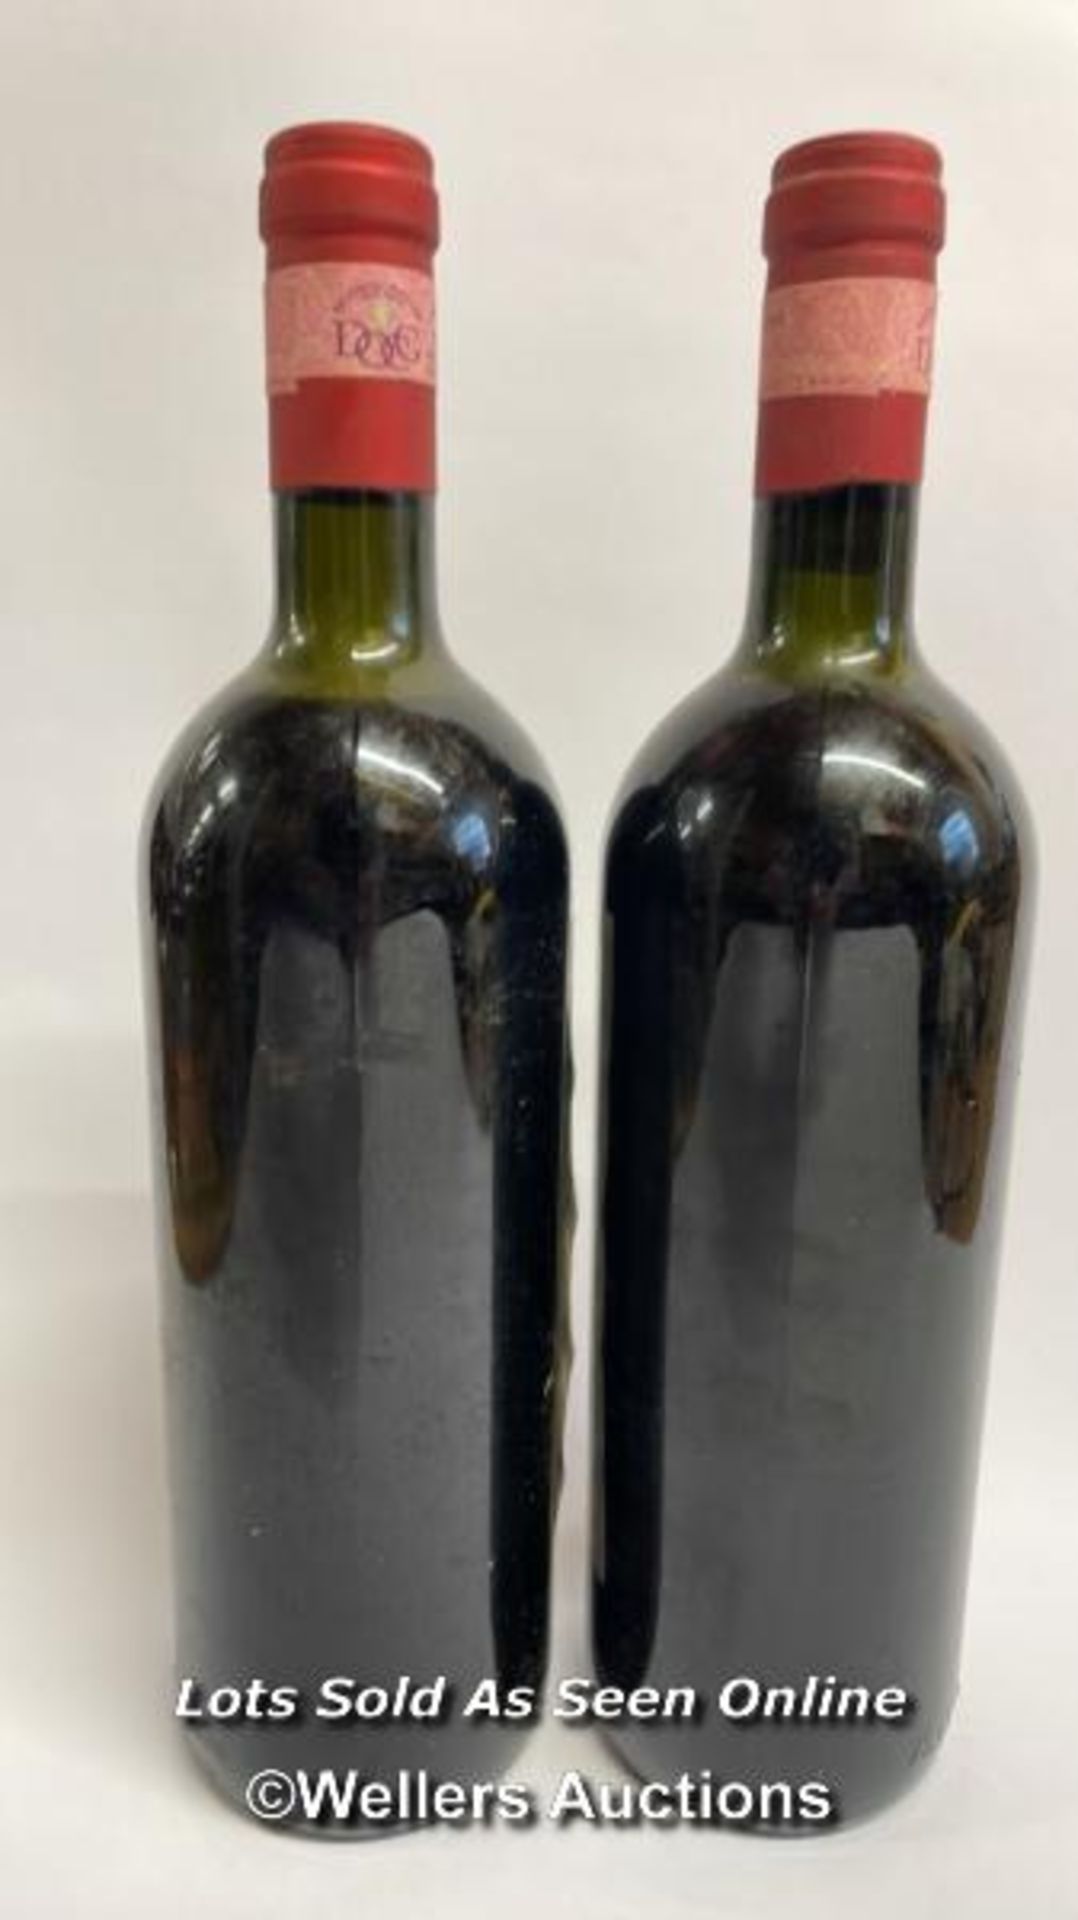 Two bottles of 1985 Peppoli Chianti Classico, 75cl, 13% vol / Please see images for fill level and - Image 5 of 5